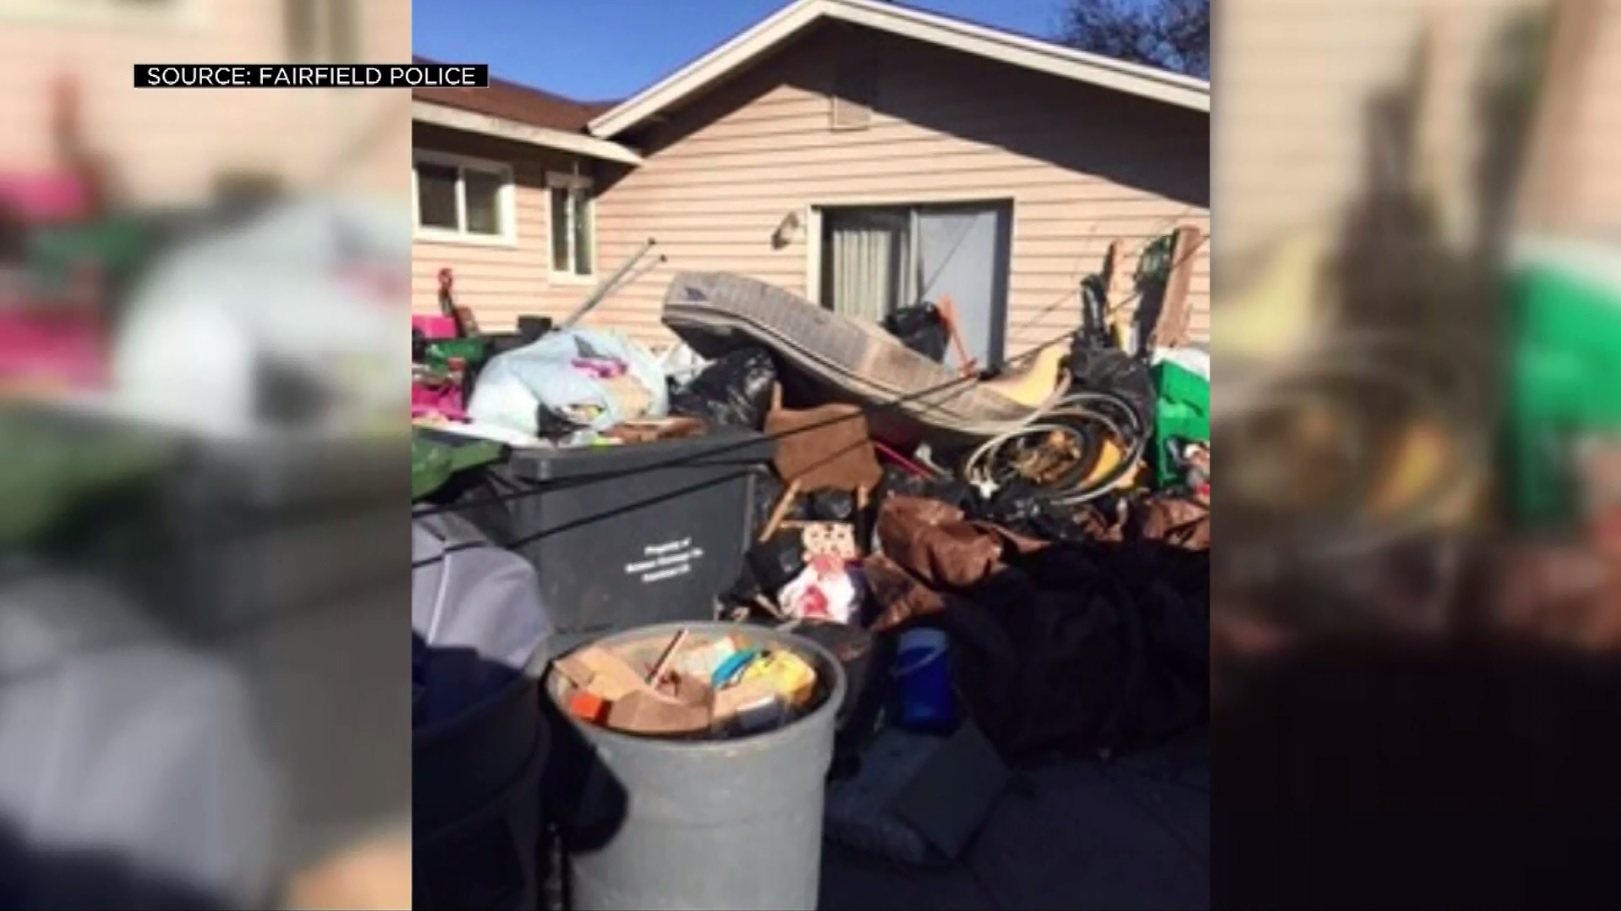 A massive pile of trash before it was removed from a home on the 200 block of Atlantic in Fairfield on February 11, 2020. (Fairfield Police Department)